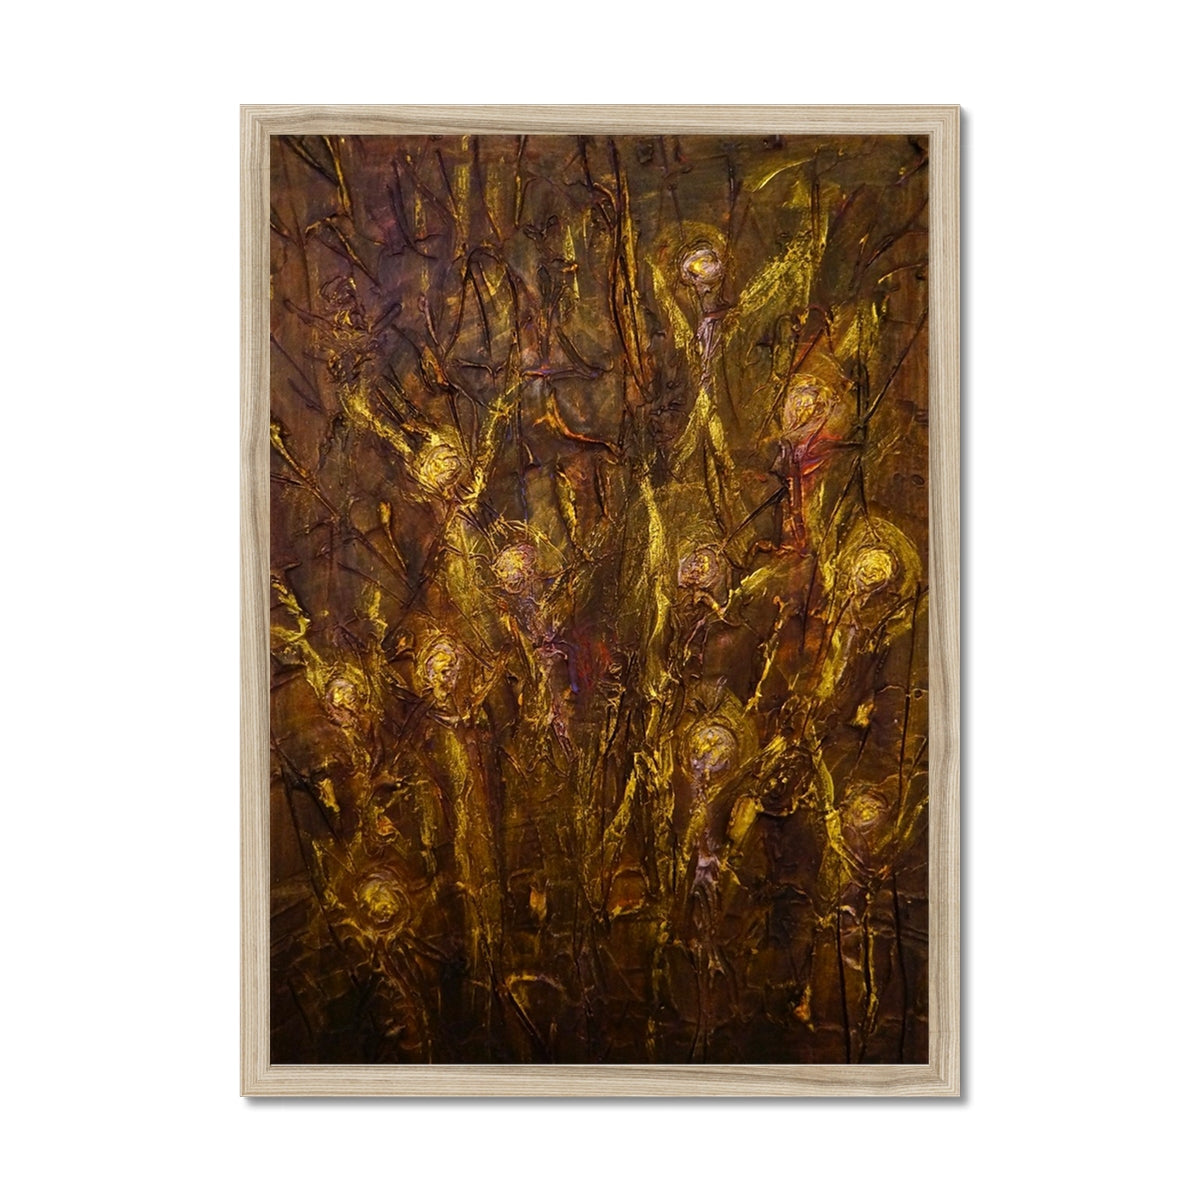 Tam O Shanter Witches Painting | Framed Prints From Scotland-Framed Prints-Abstract & Impressionistic Art Gallery-A2 Portrait-Natural Frame-Paintings, Prints, Homeware, Art Gifts From Scotland By Scottish Artist Kevin Hunter